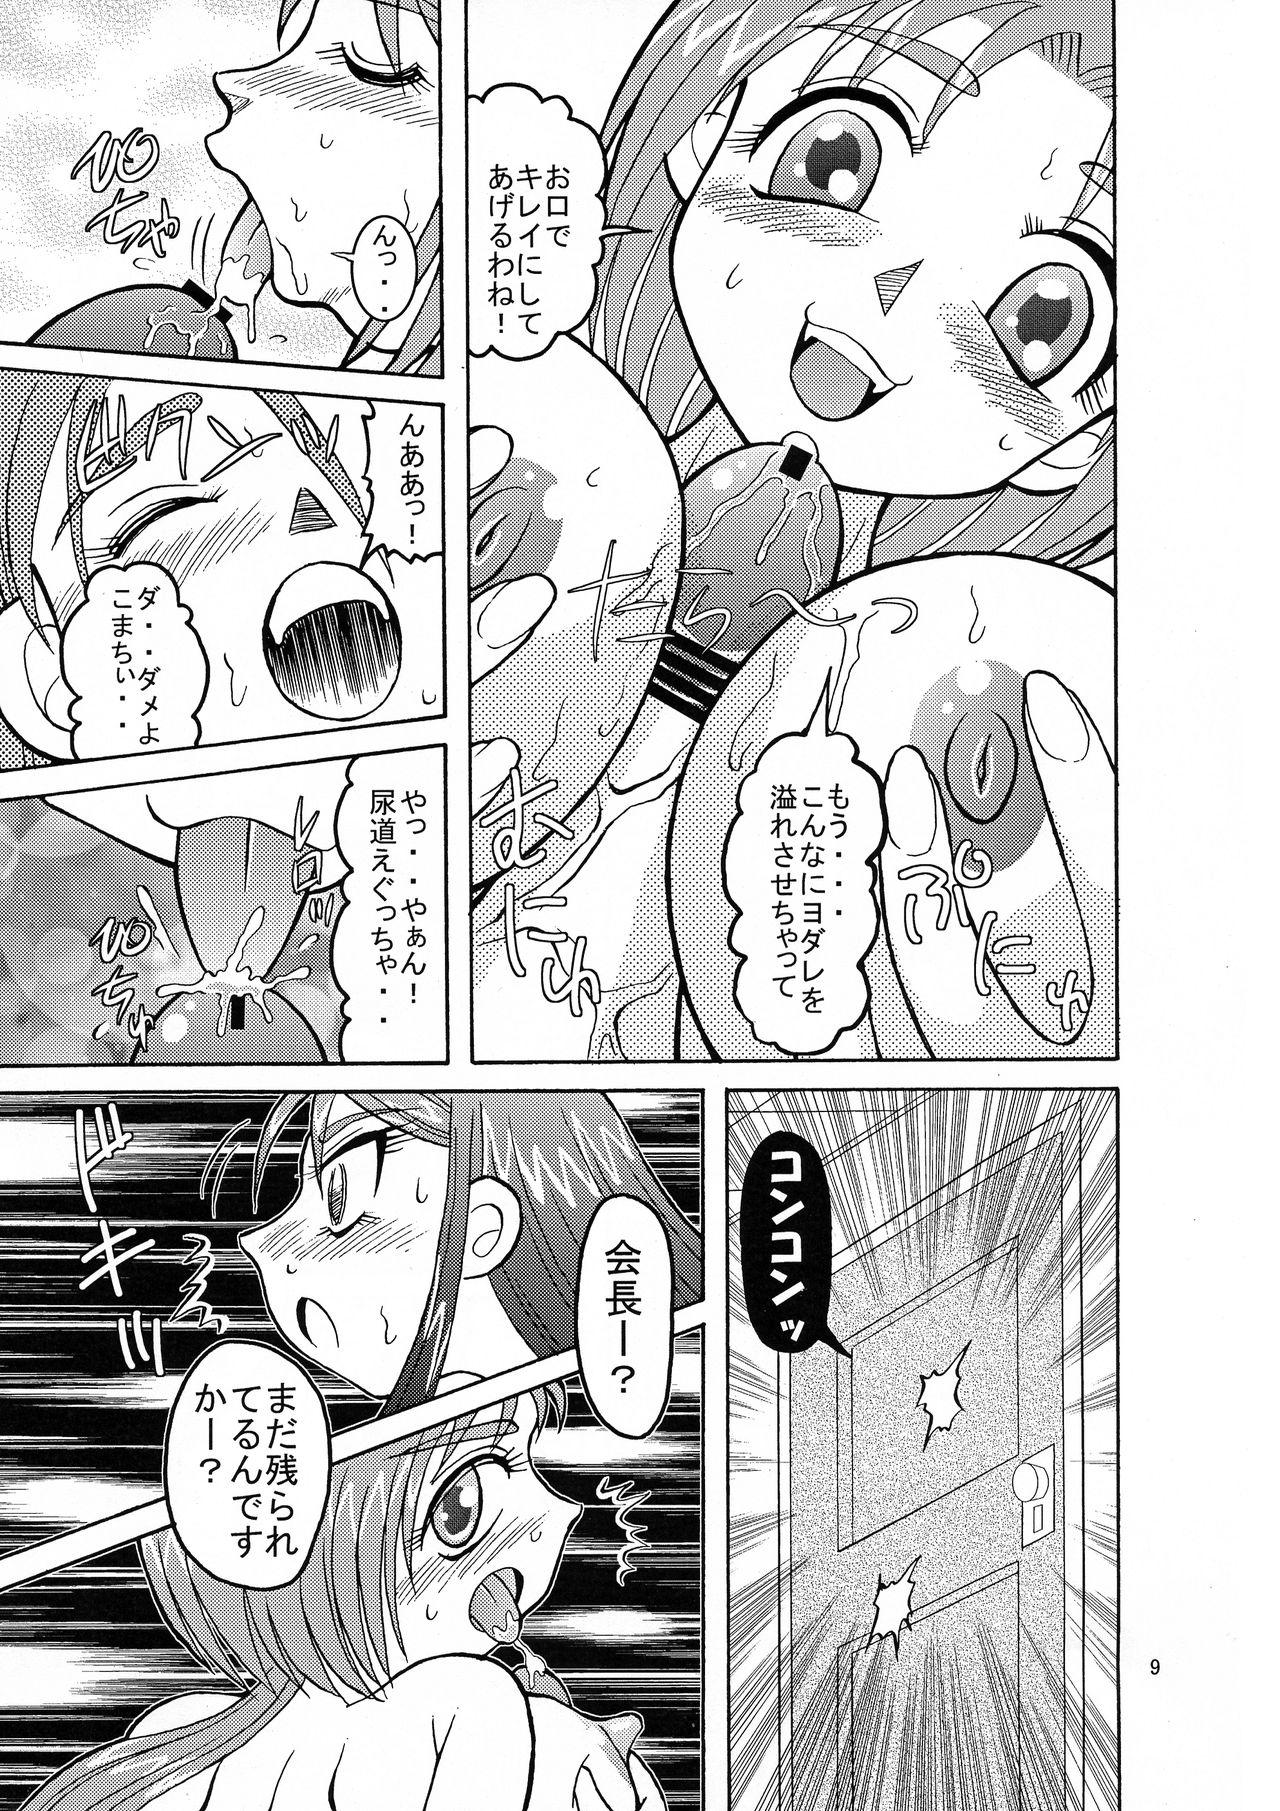 Latex Komakare GO! GO! - Yes precure 5 Sluts - Page 9